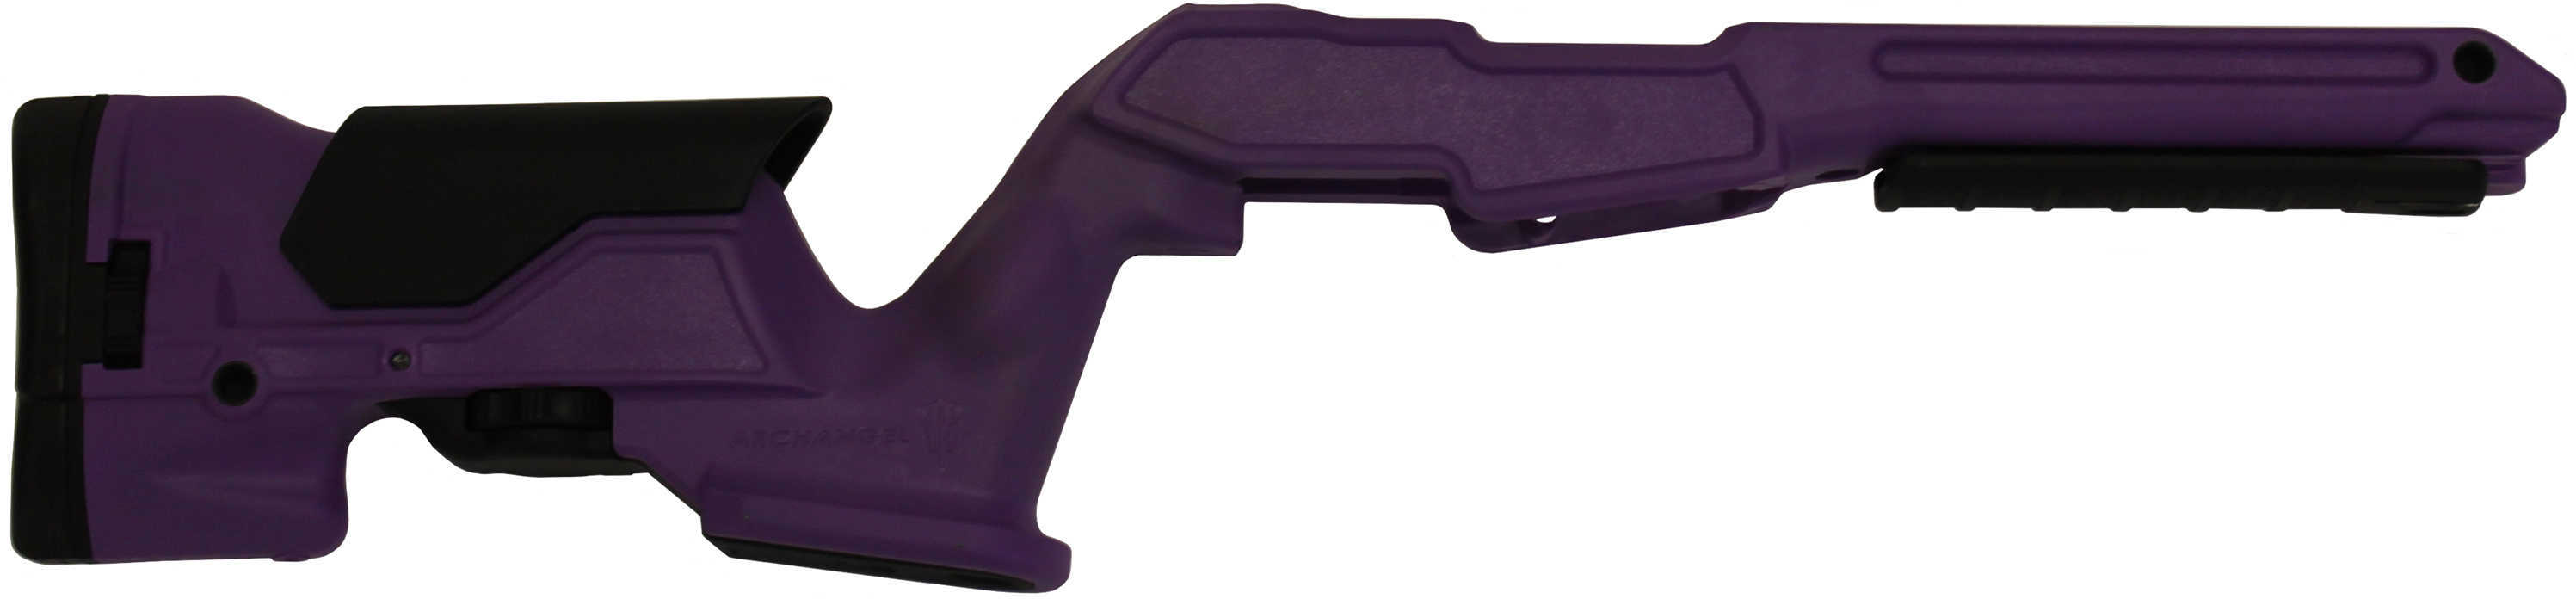 ProMag Archangel Ruger 10/22 Precision Stock Plinker Purple Technapolymer Md: AAP1022-PP